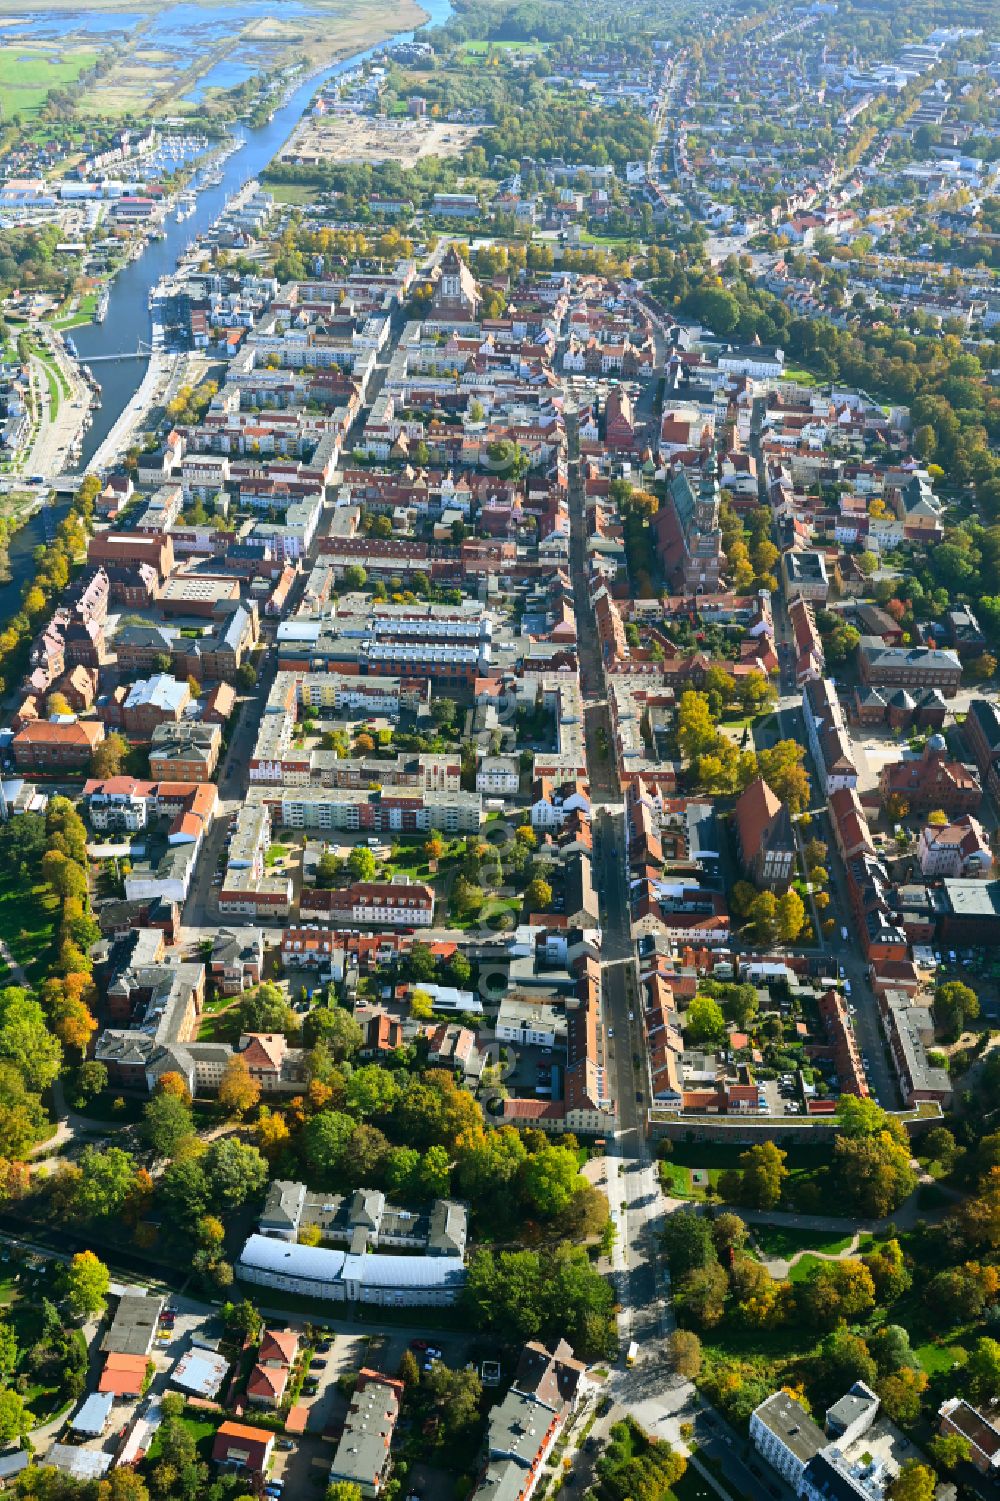 Hansestadt Greifswald from above - City view of the historic city center with Jacobi Church and Cathedral of St. Nikolai and marketplace of the Hanseatic city of Greifswald in Mecklenburg-Western Pomerania